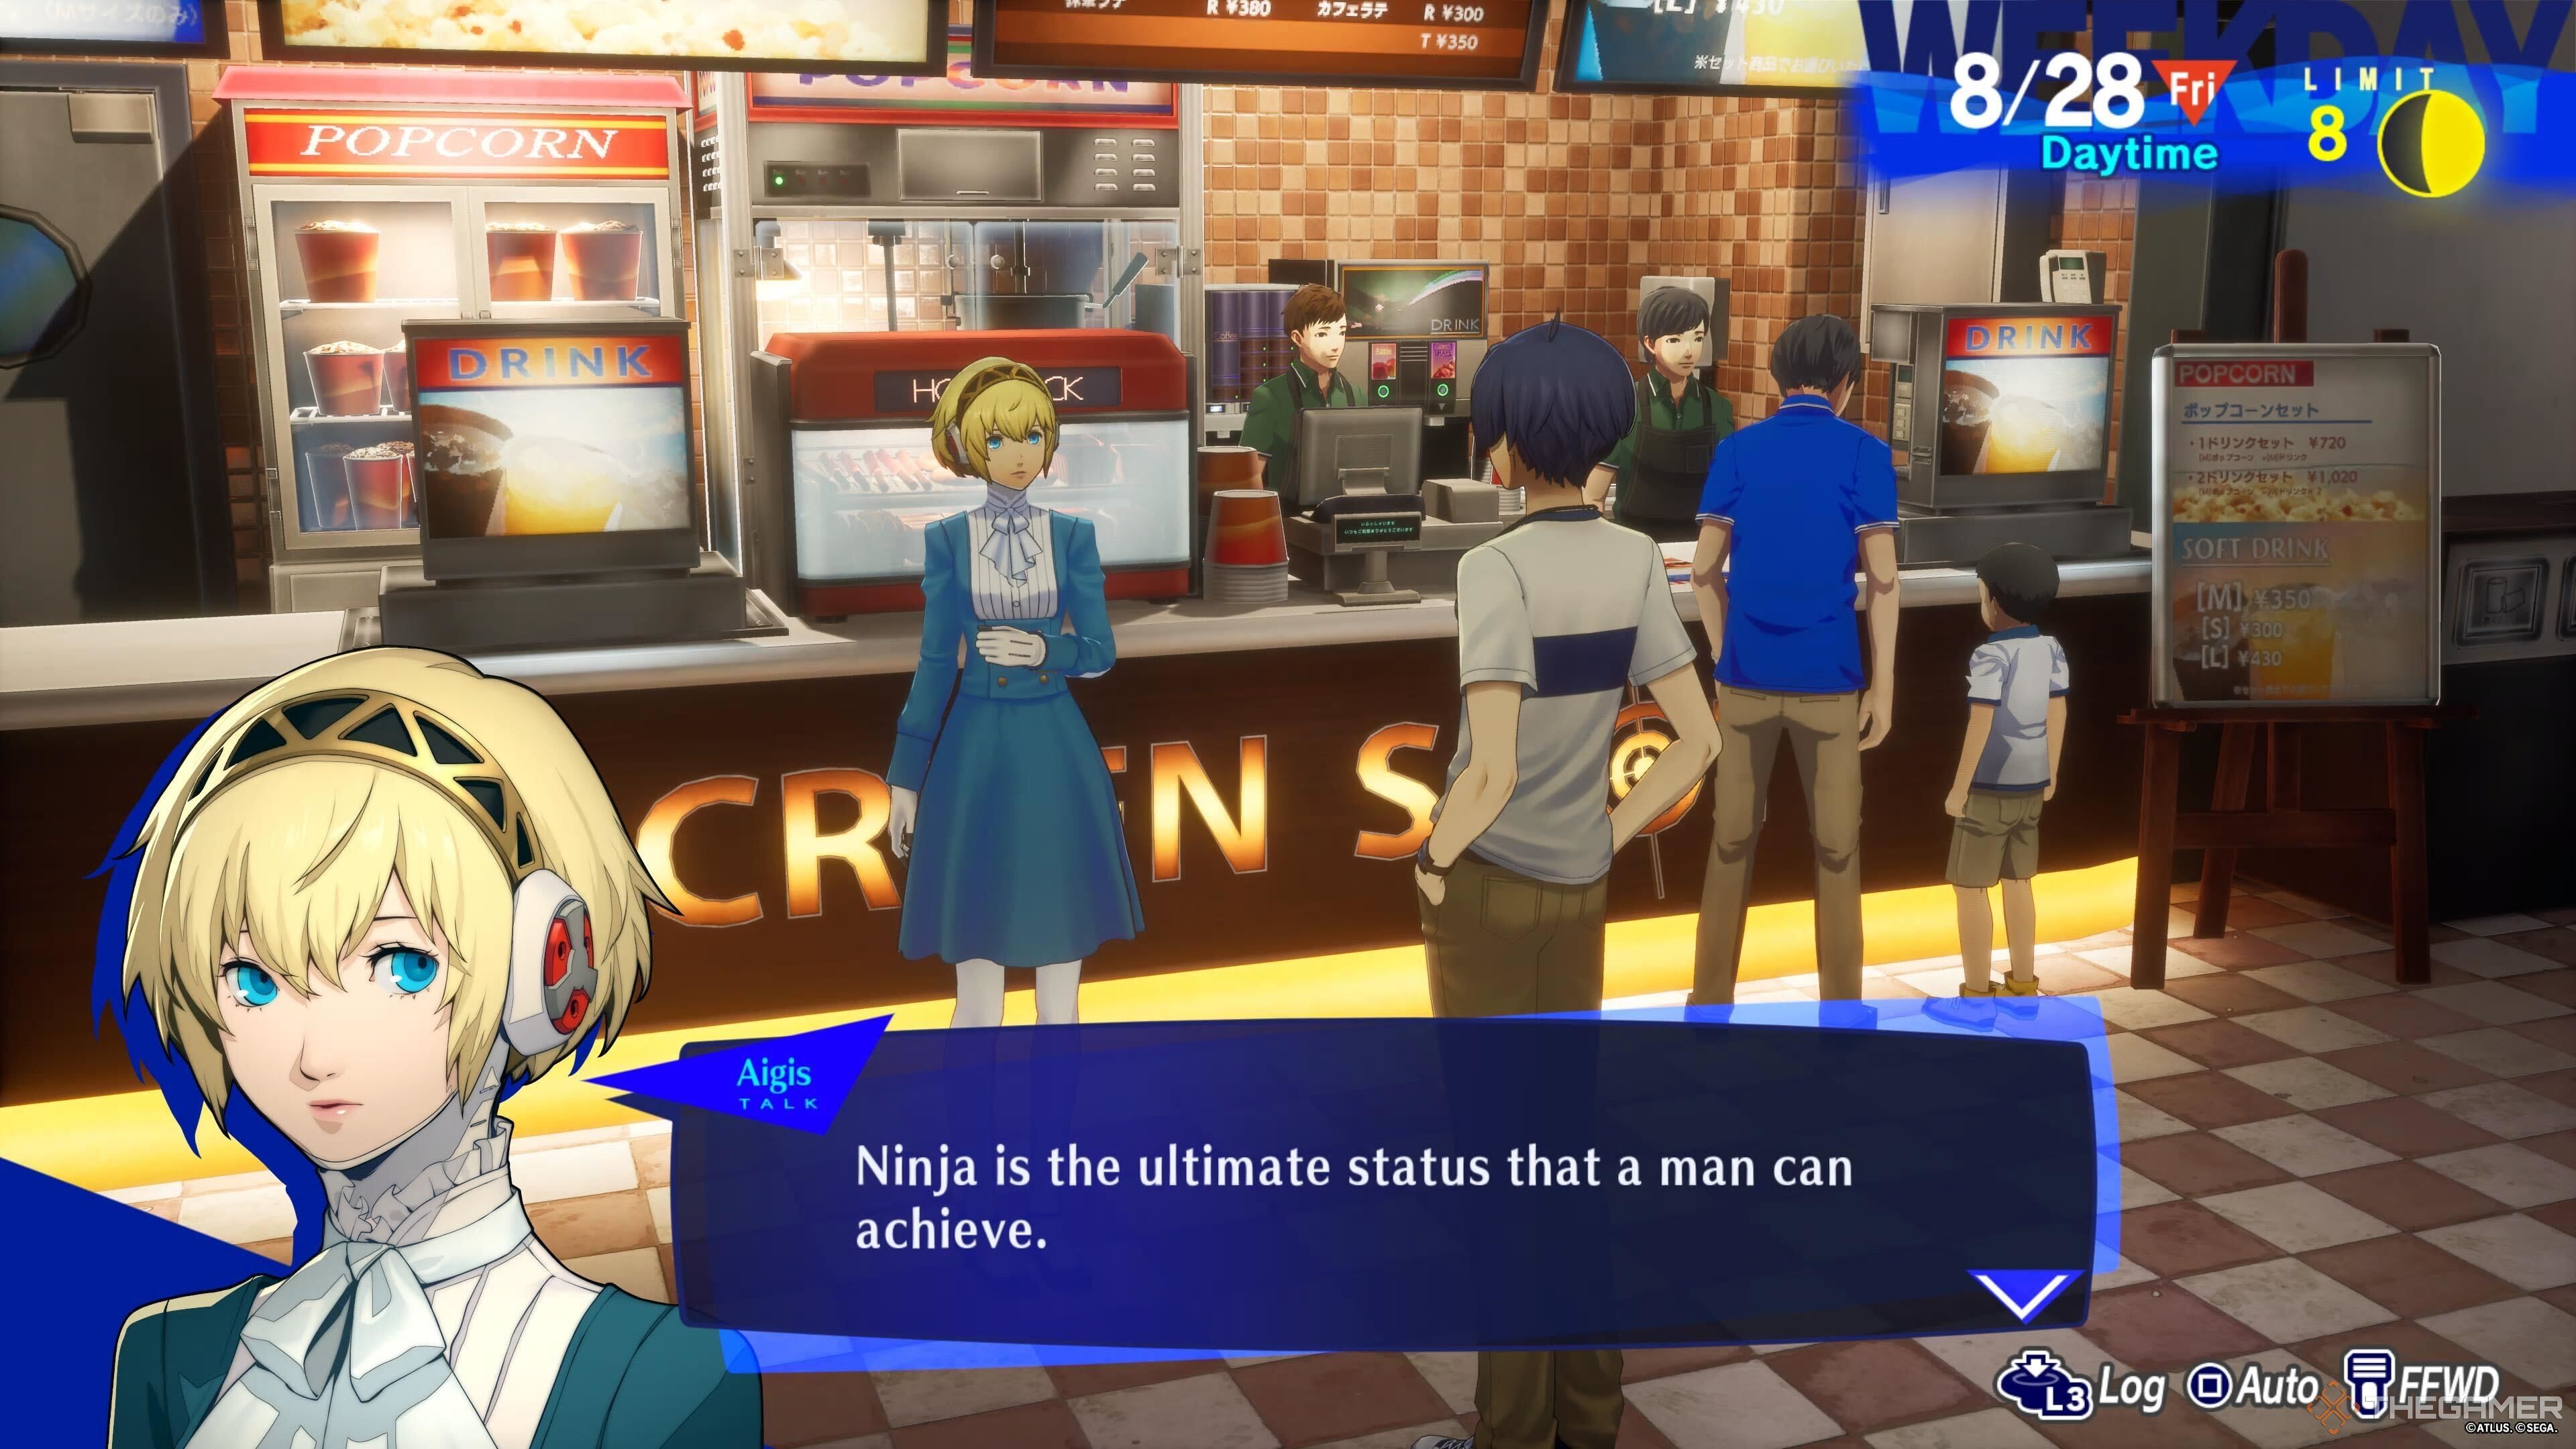 Aigis talks about Ninjas at the movies Persona 3 Reload